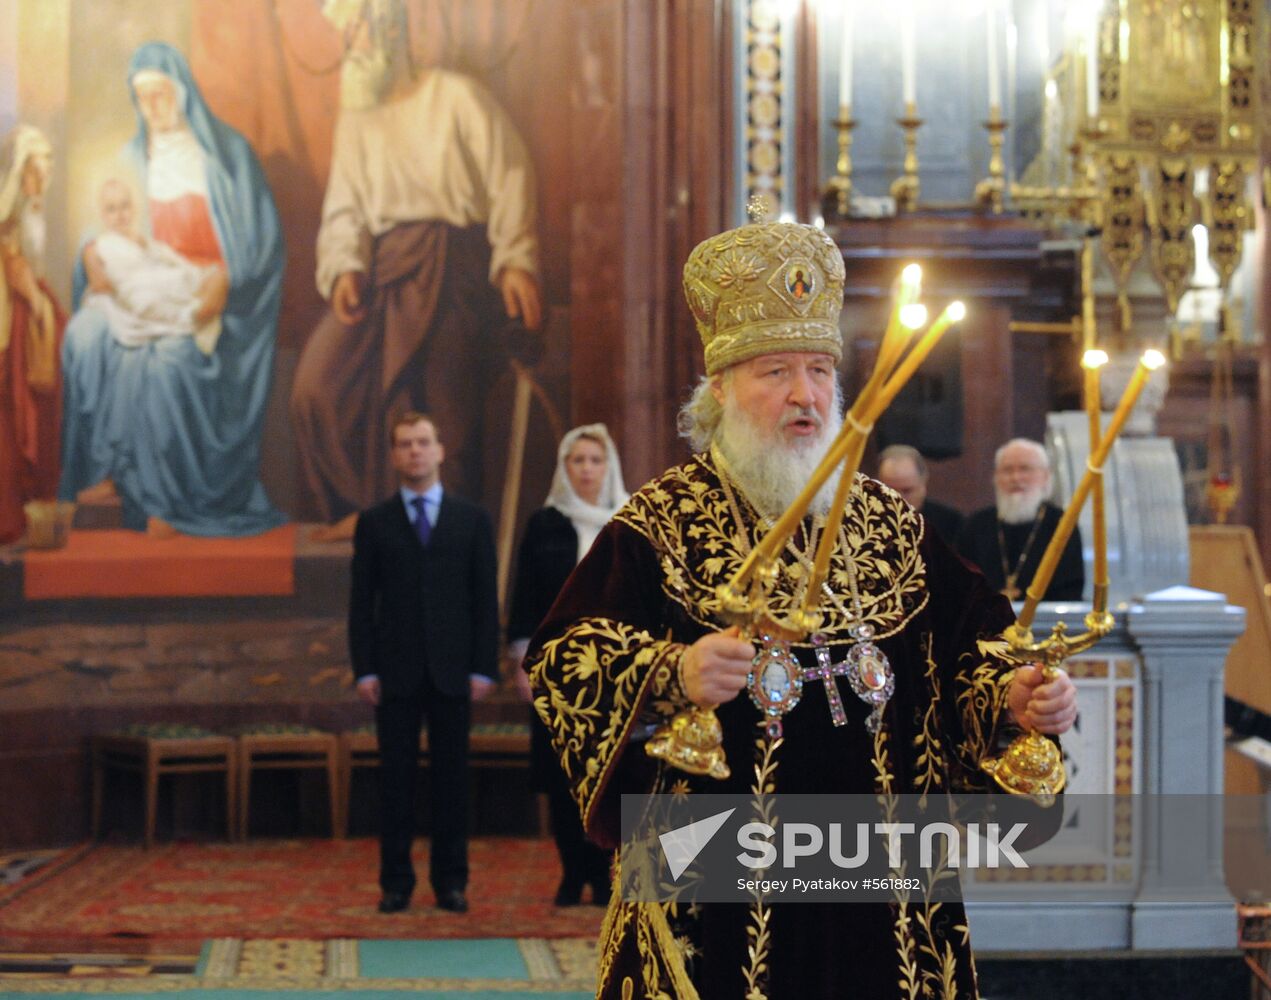 1st anniversary of Patriarch Kirill's enthronement